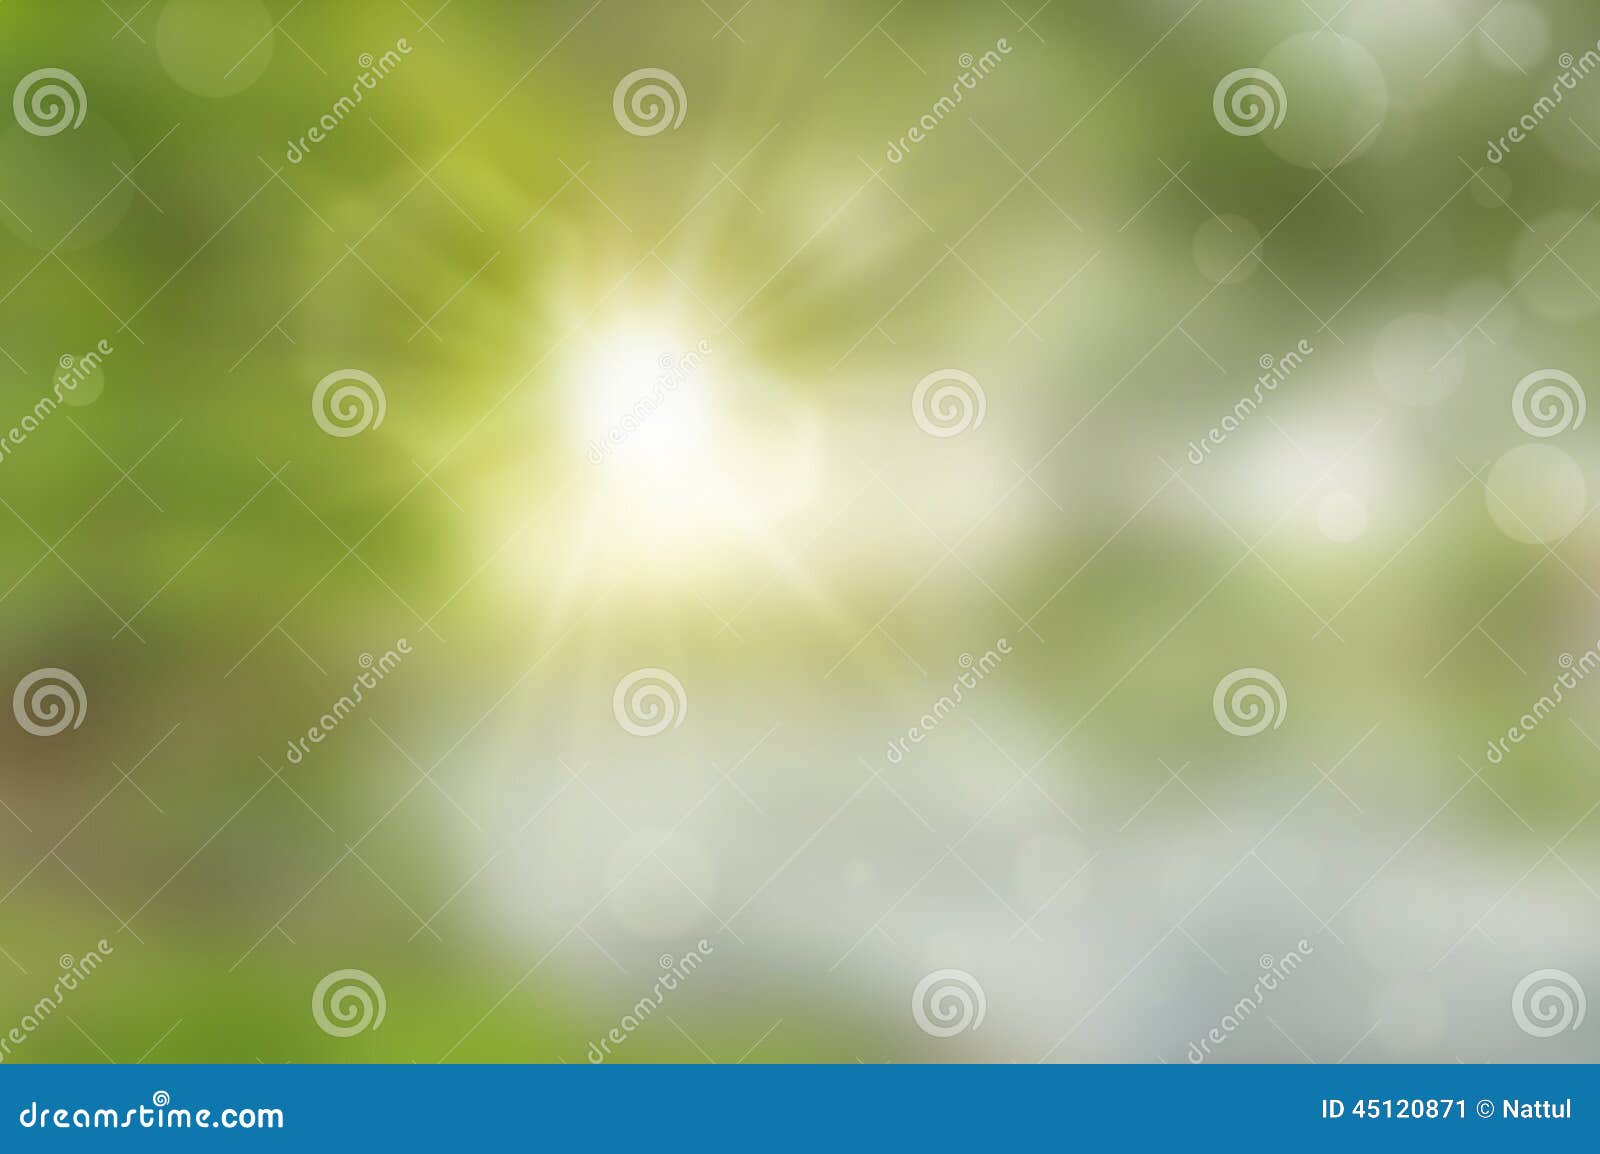 abstract blurry green background